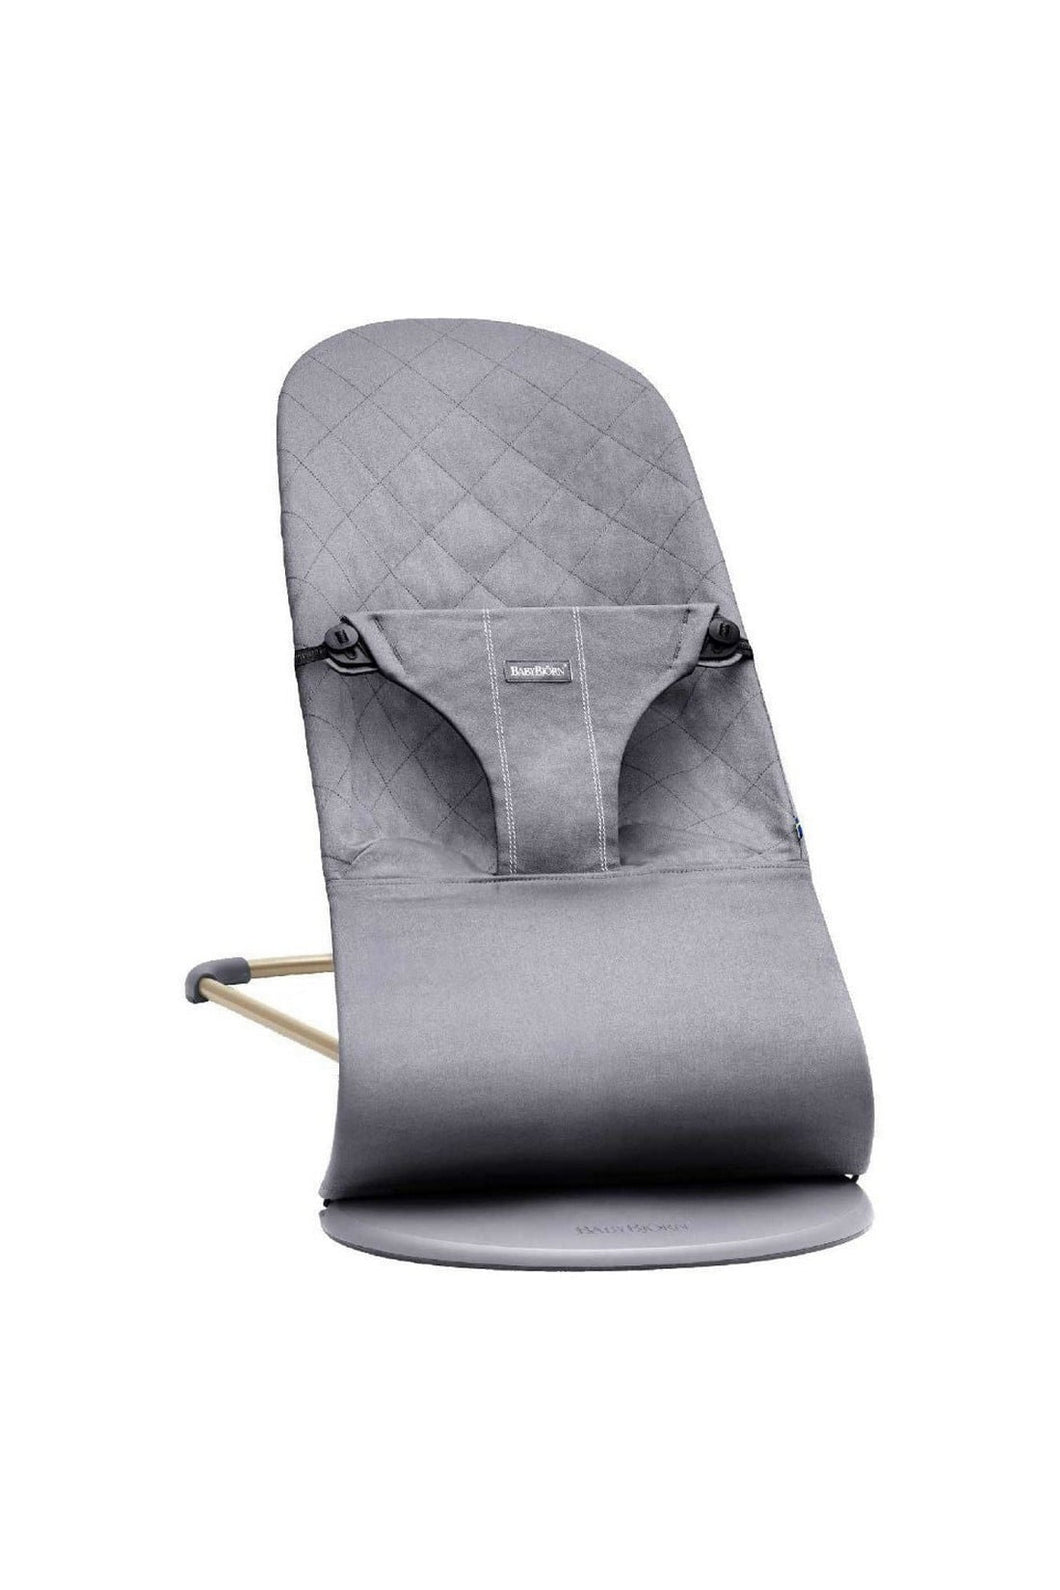 Babybjorn Bouncer Bliss Anthracite Cotton